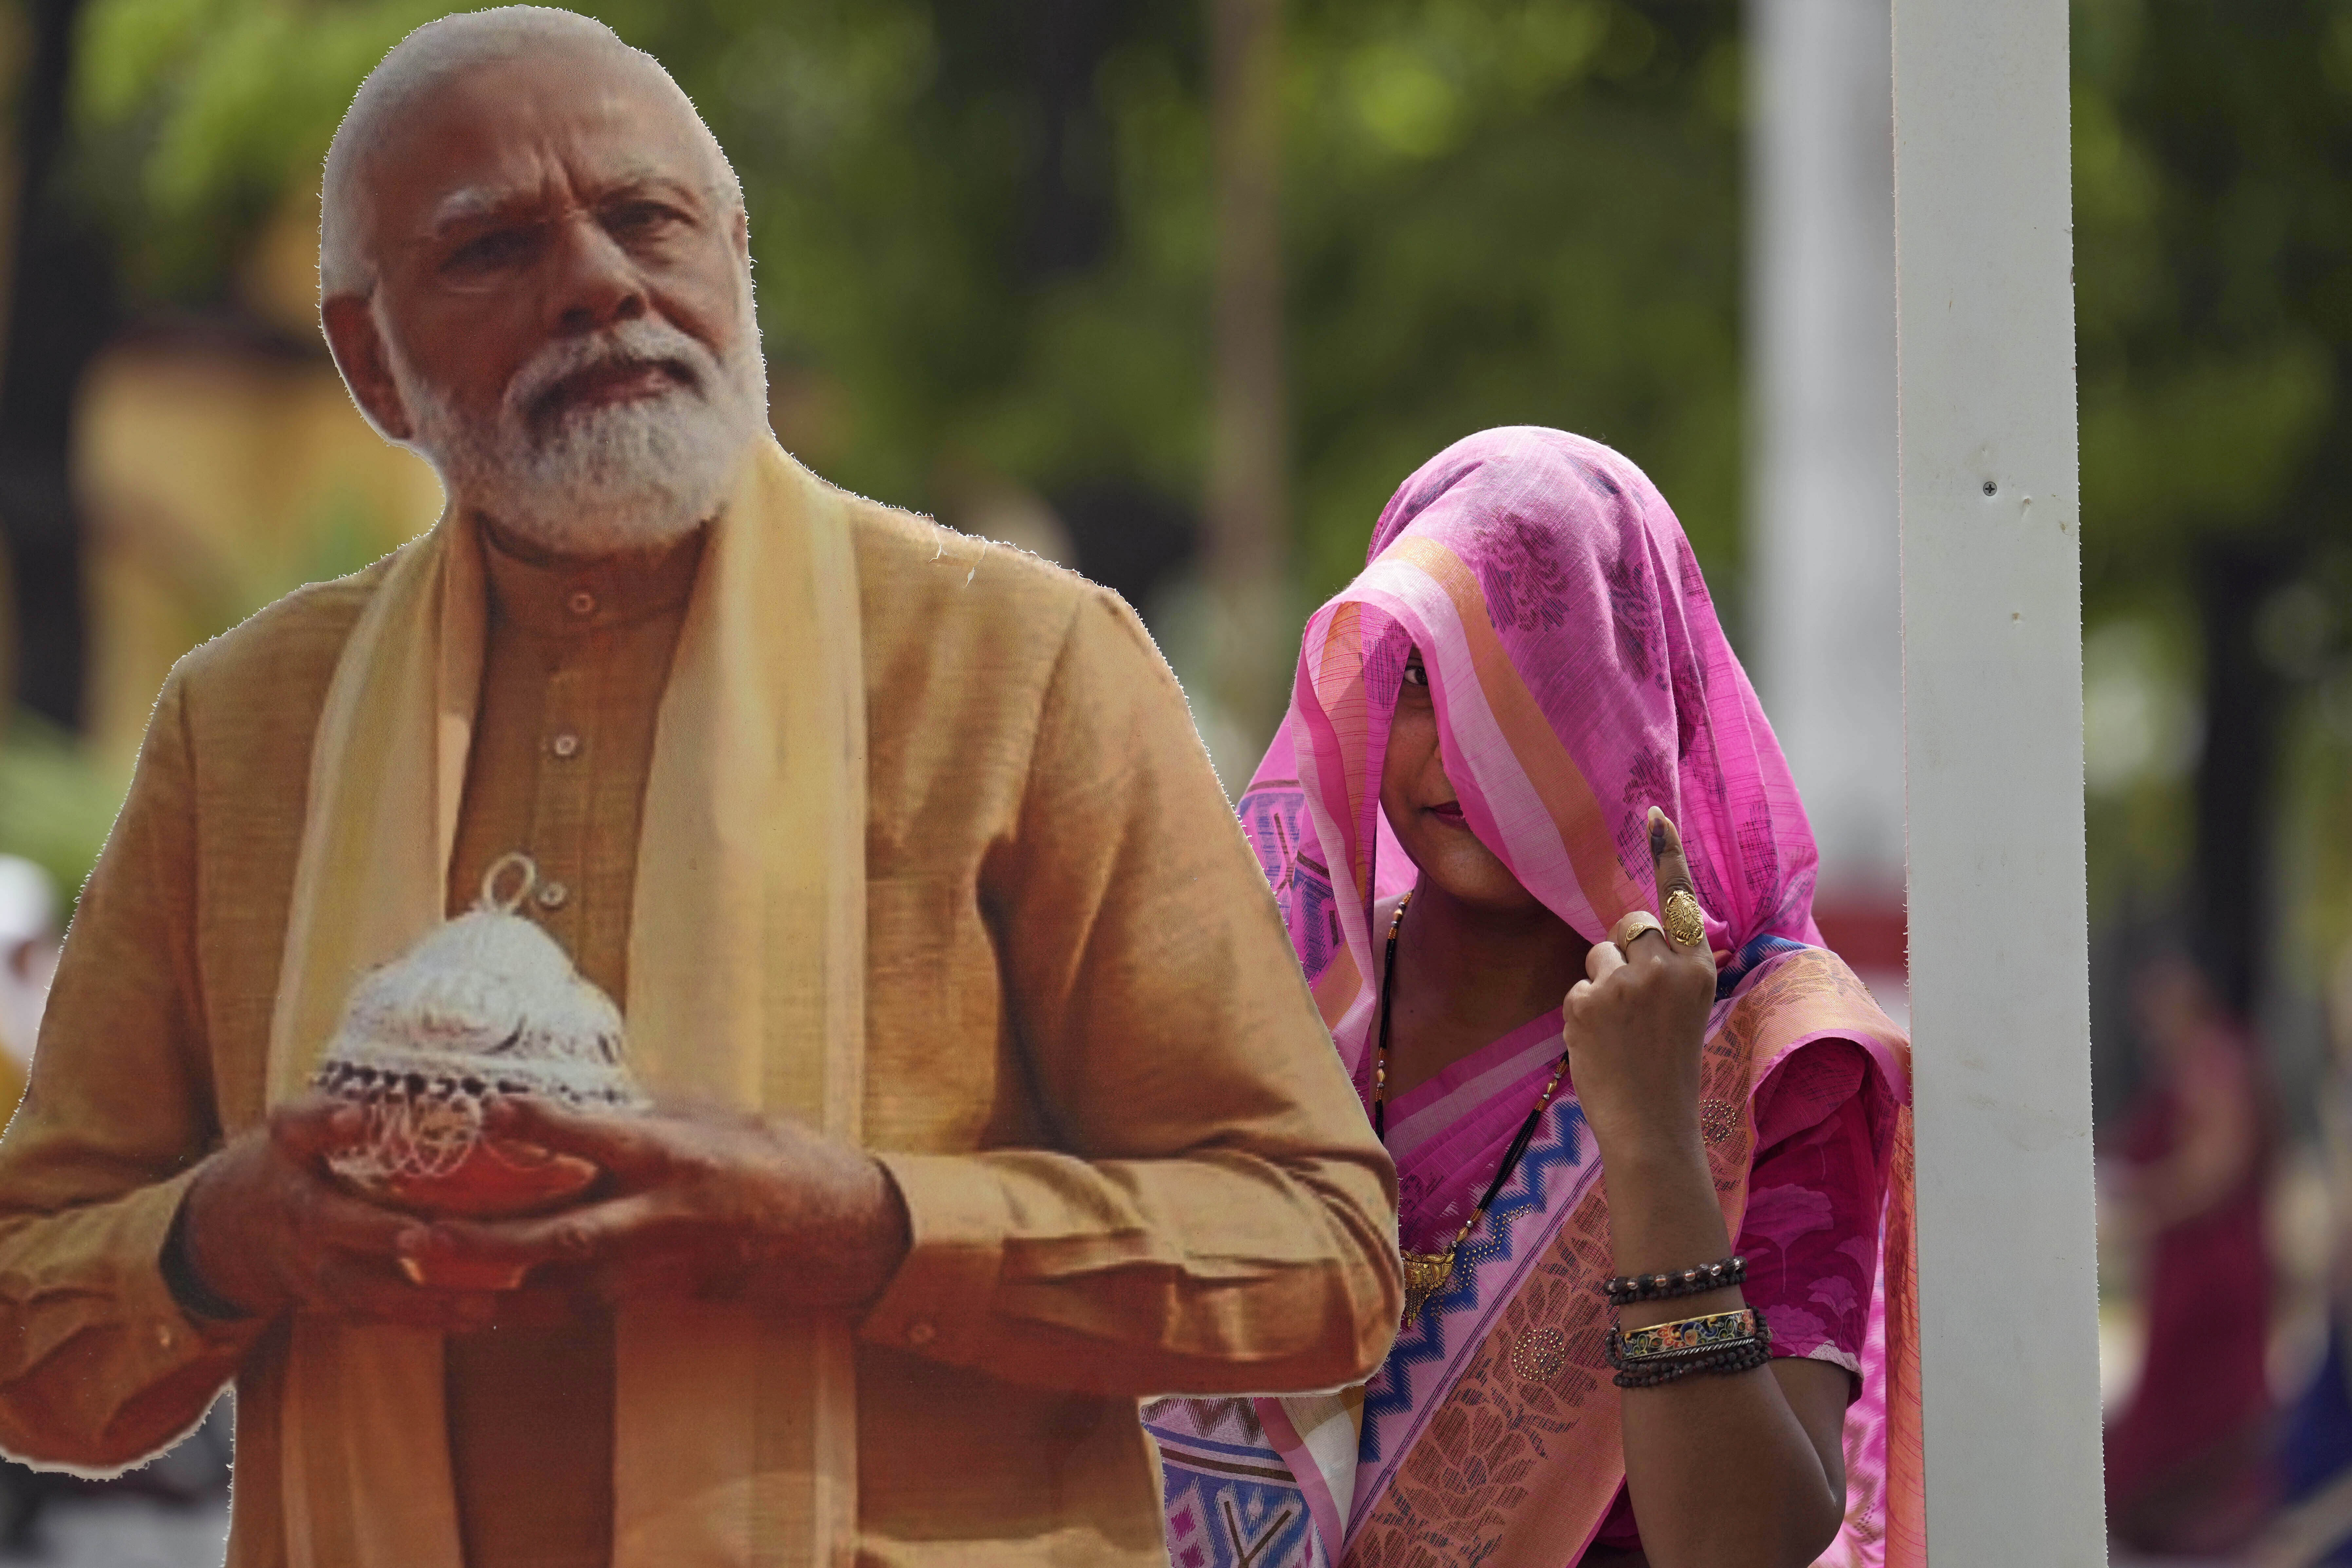 The Latest India counts votes from a megaelection seen as a